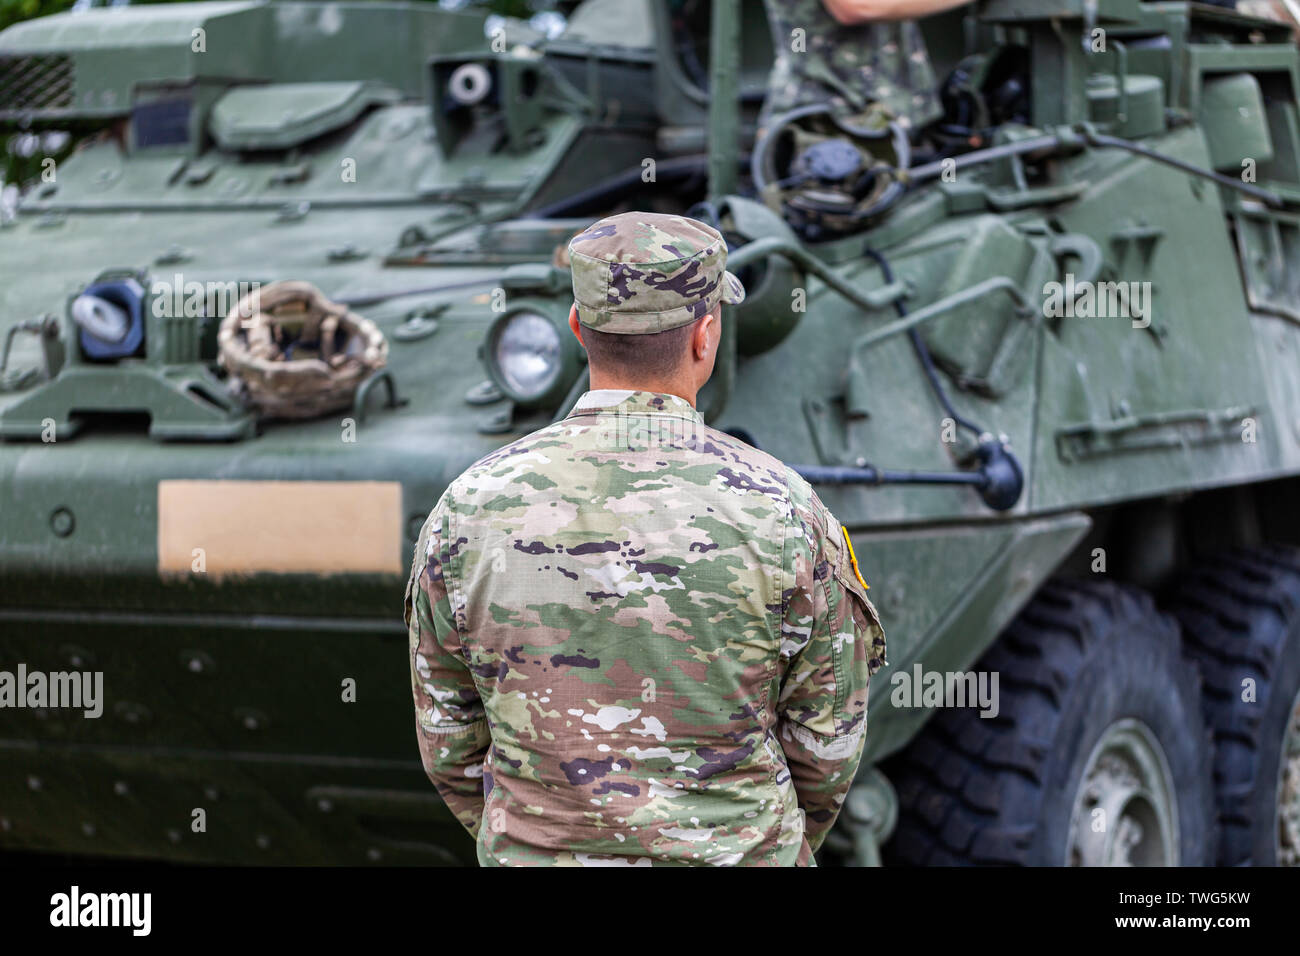 A soldier from the united states army stands in front of an armored fighting vehicle Stock Photo